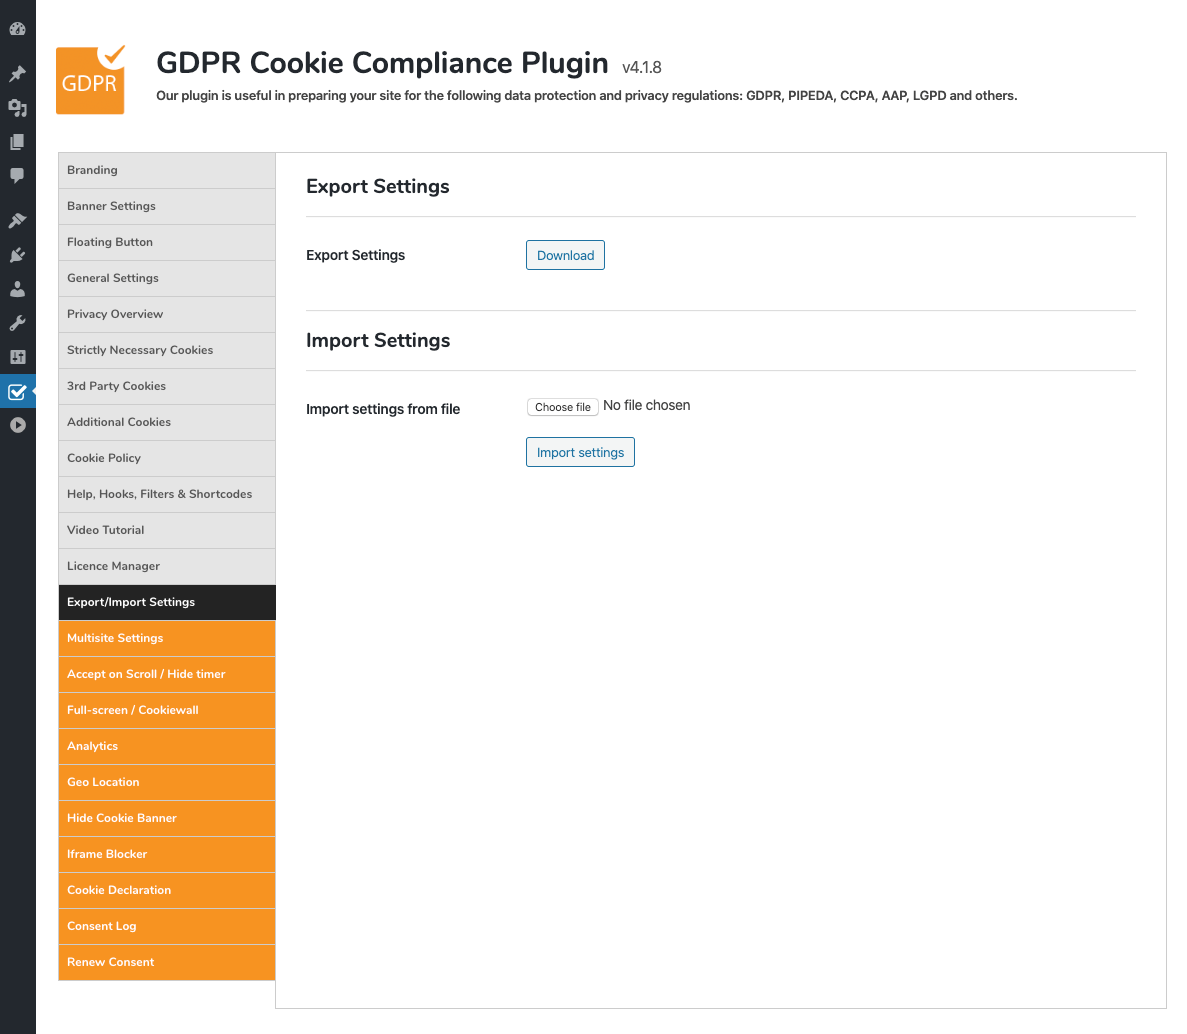 GDPR Cookie Compliance - Admin - Additional Cookies (GTM Example Head)